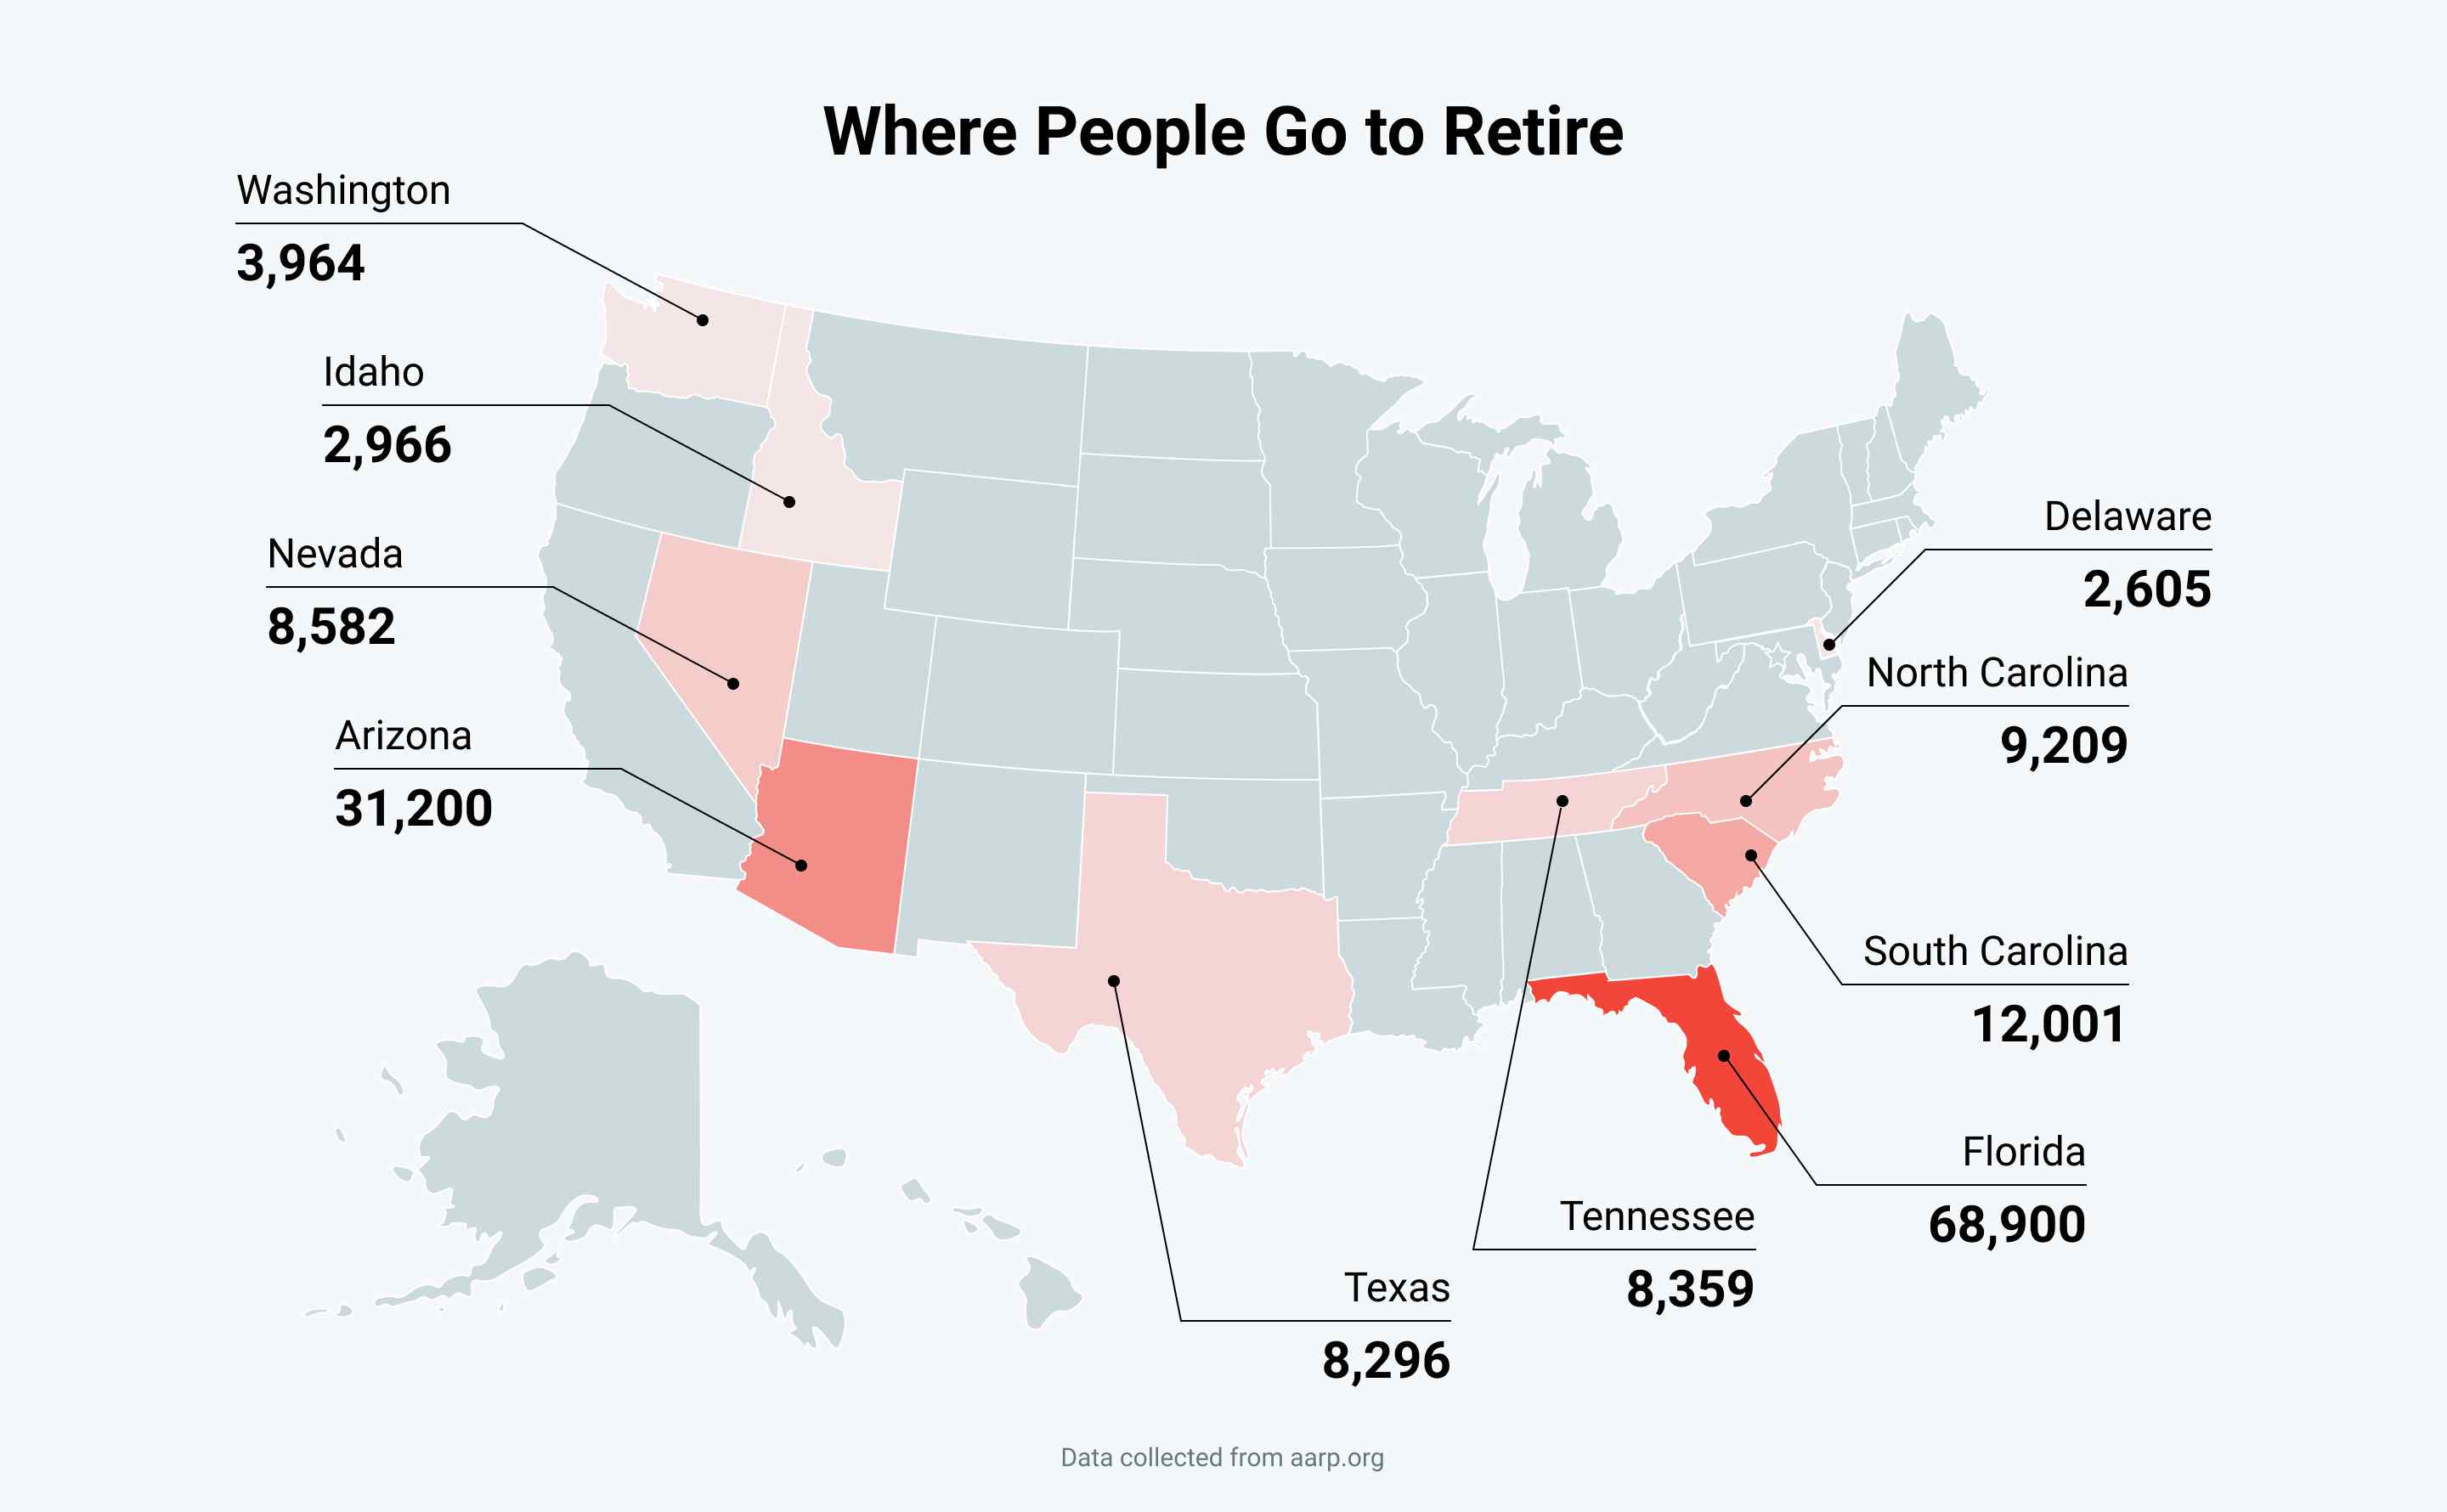 Where people go to retire.